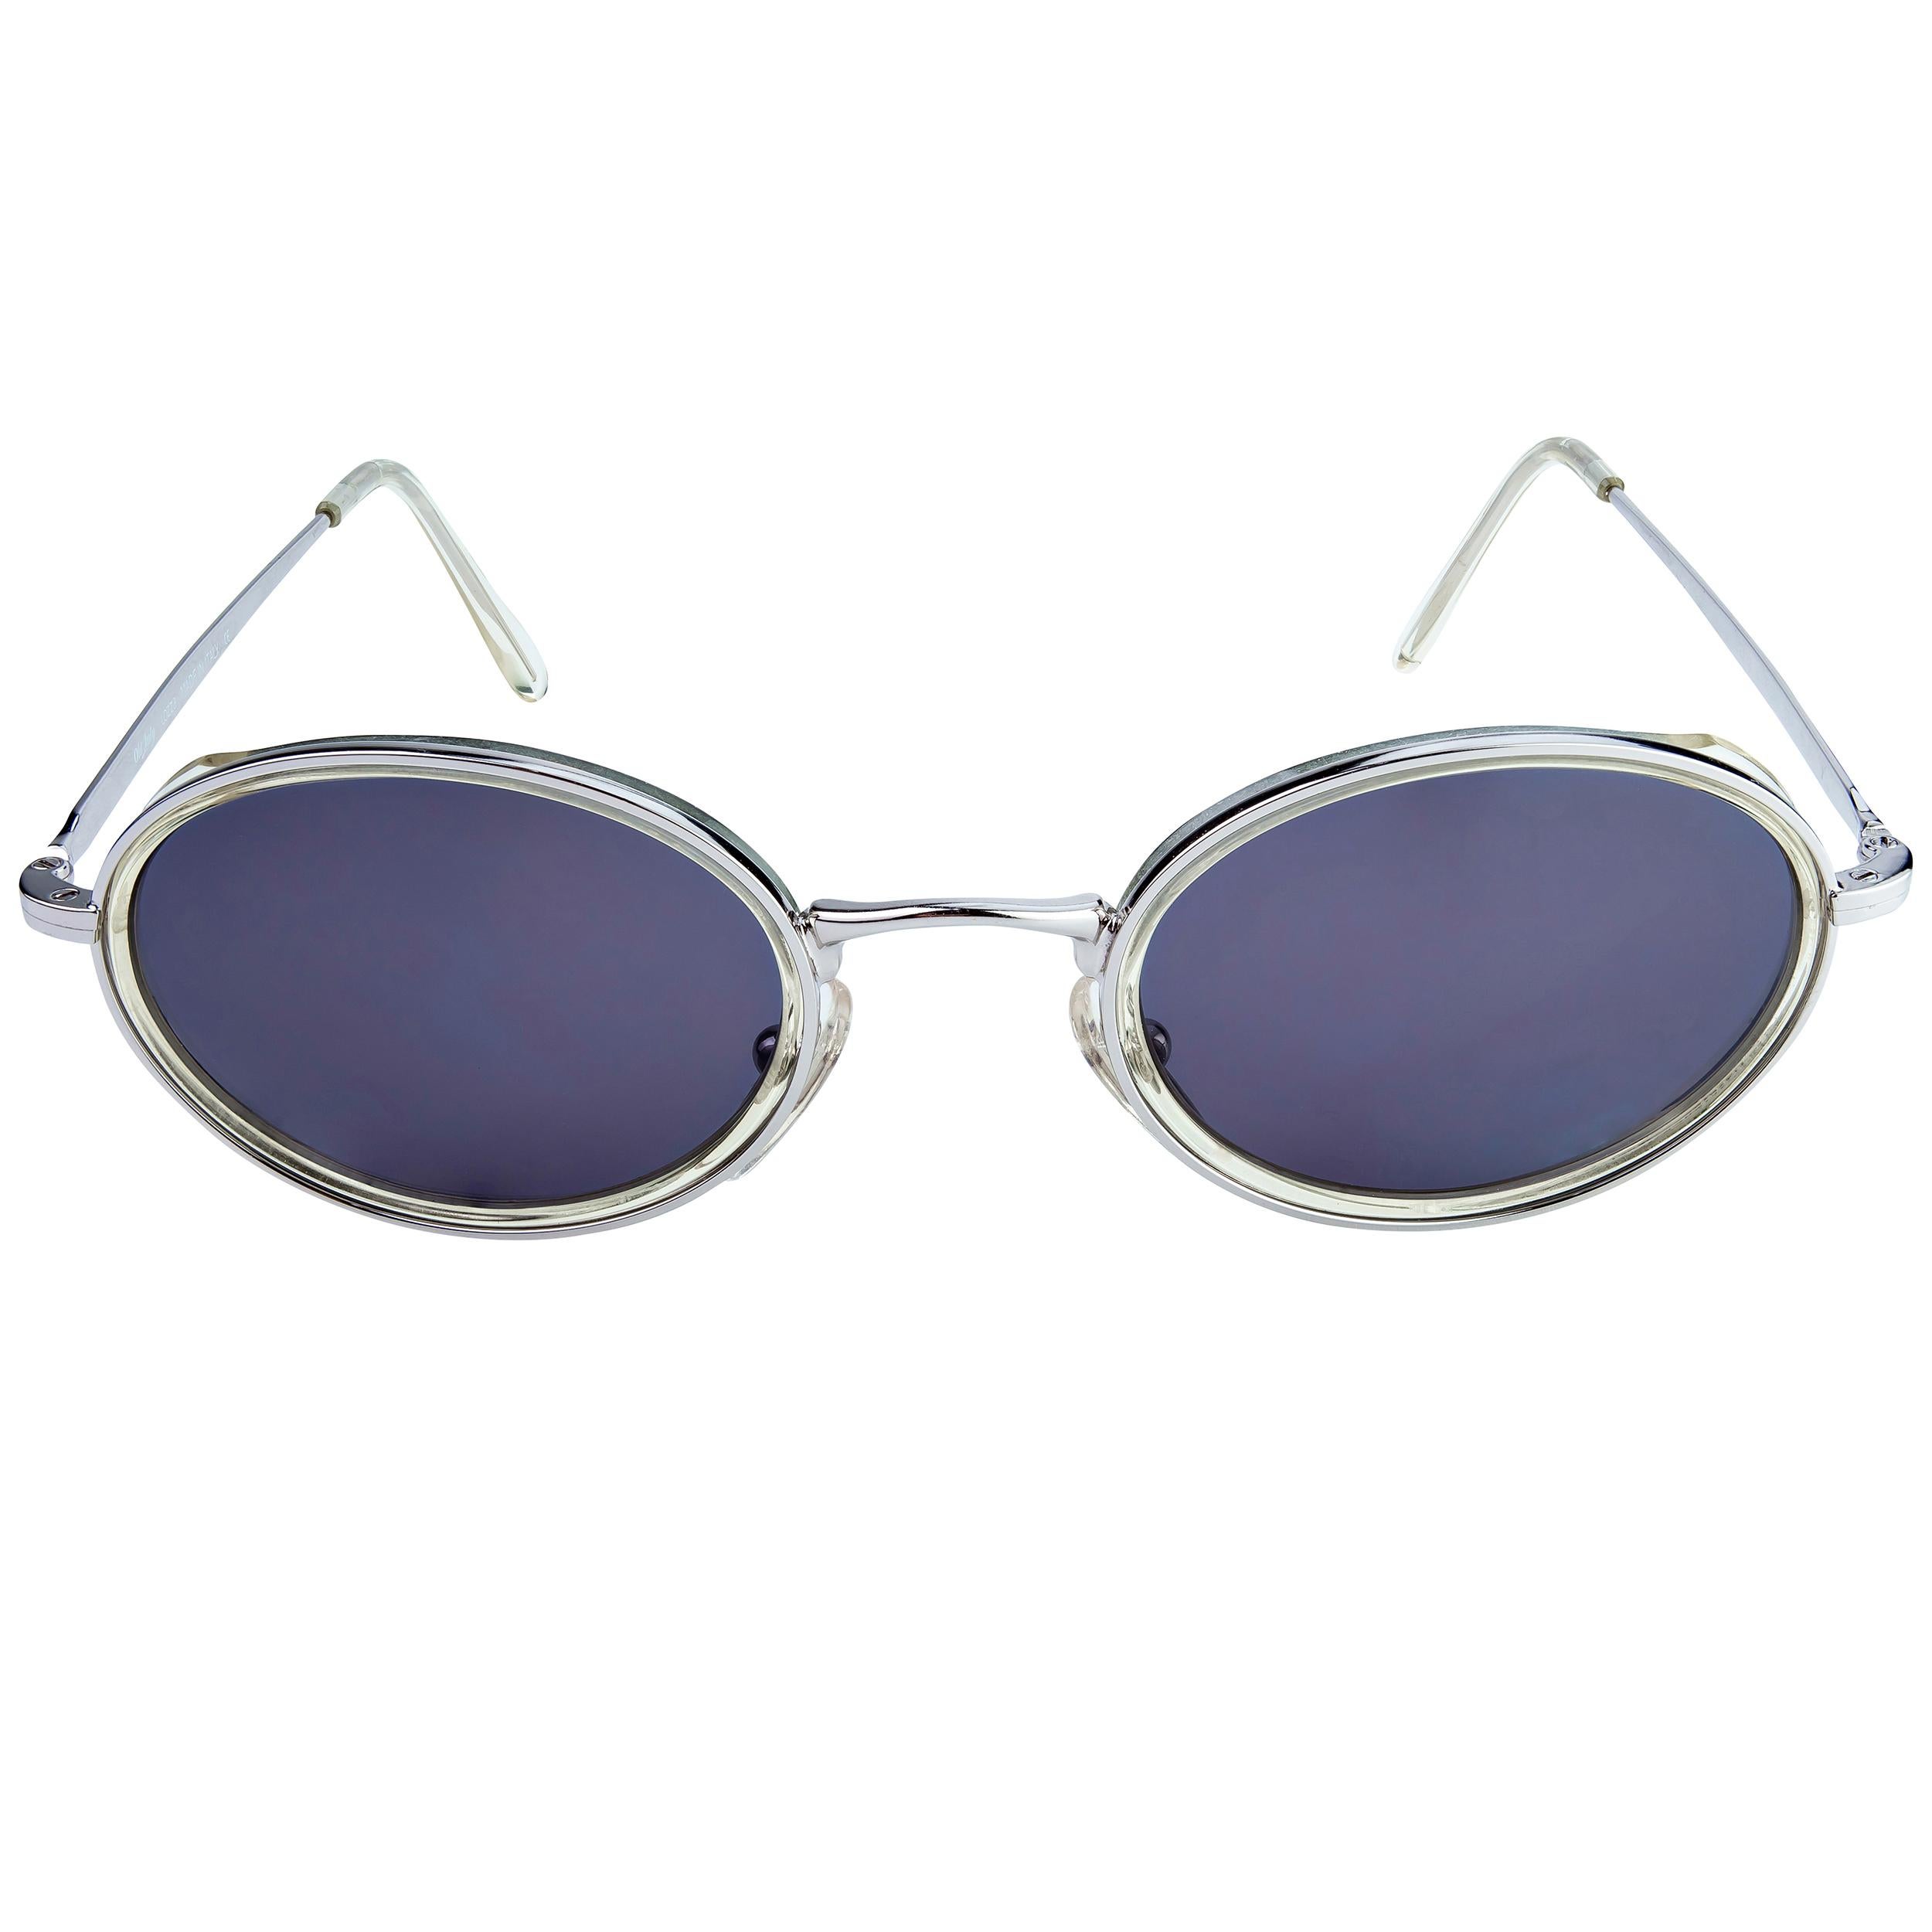 Lozza established in 1878, Lozza is the oldest eyewear brand in Italy, always a forerunner in its choice of styles and materials: in the '20s it launched the first sunglasses in cellulose and in the '30s the folding frames; in the '50s it launched